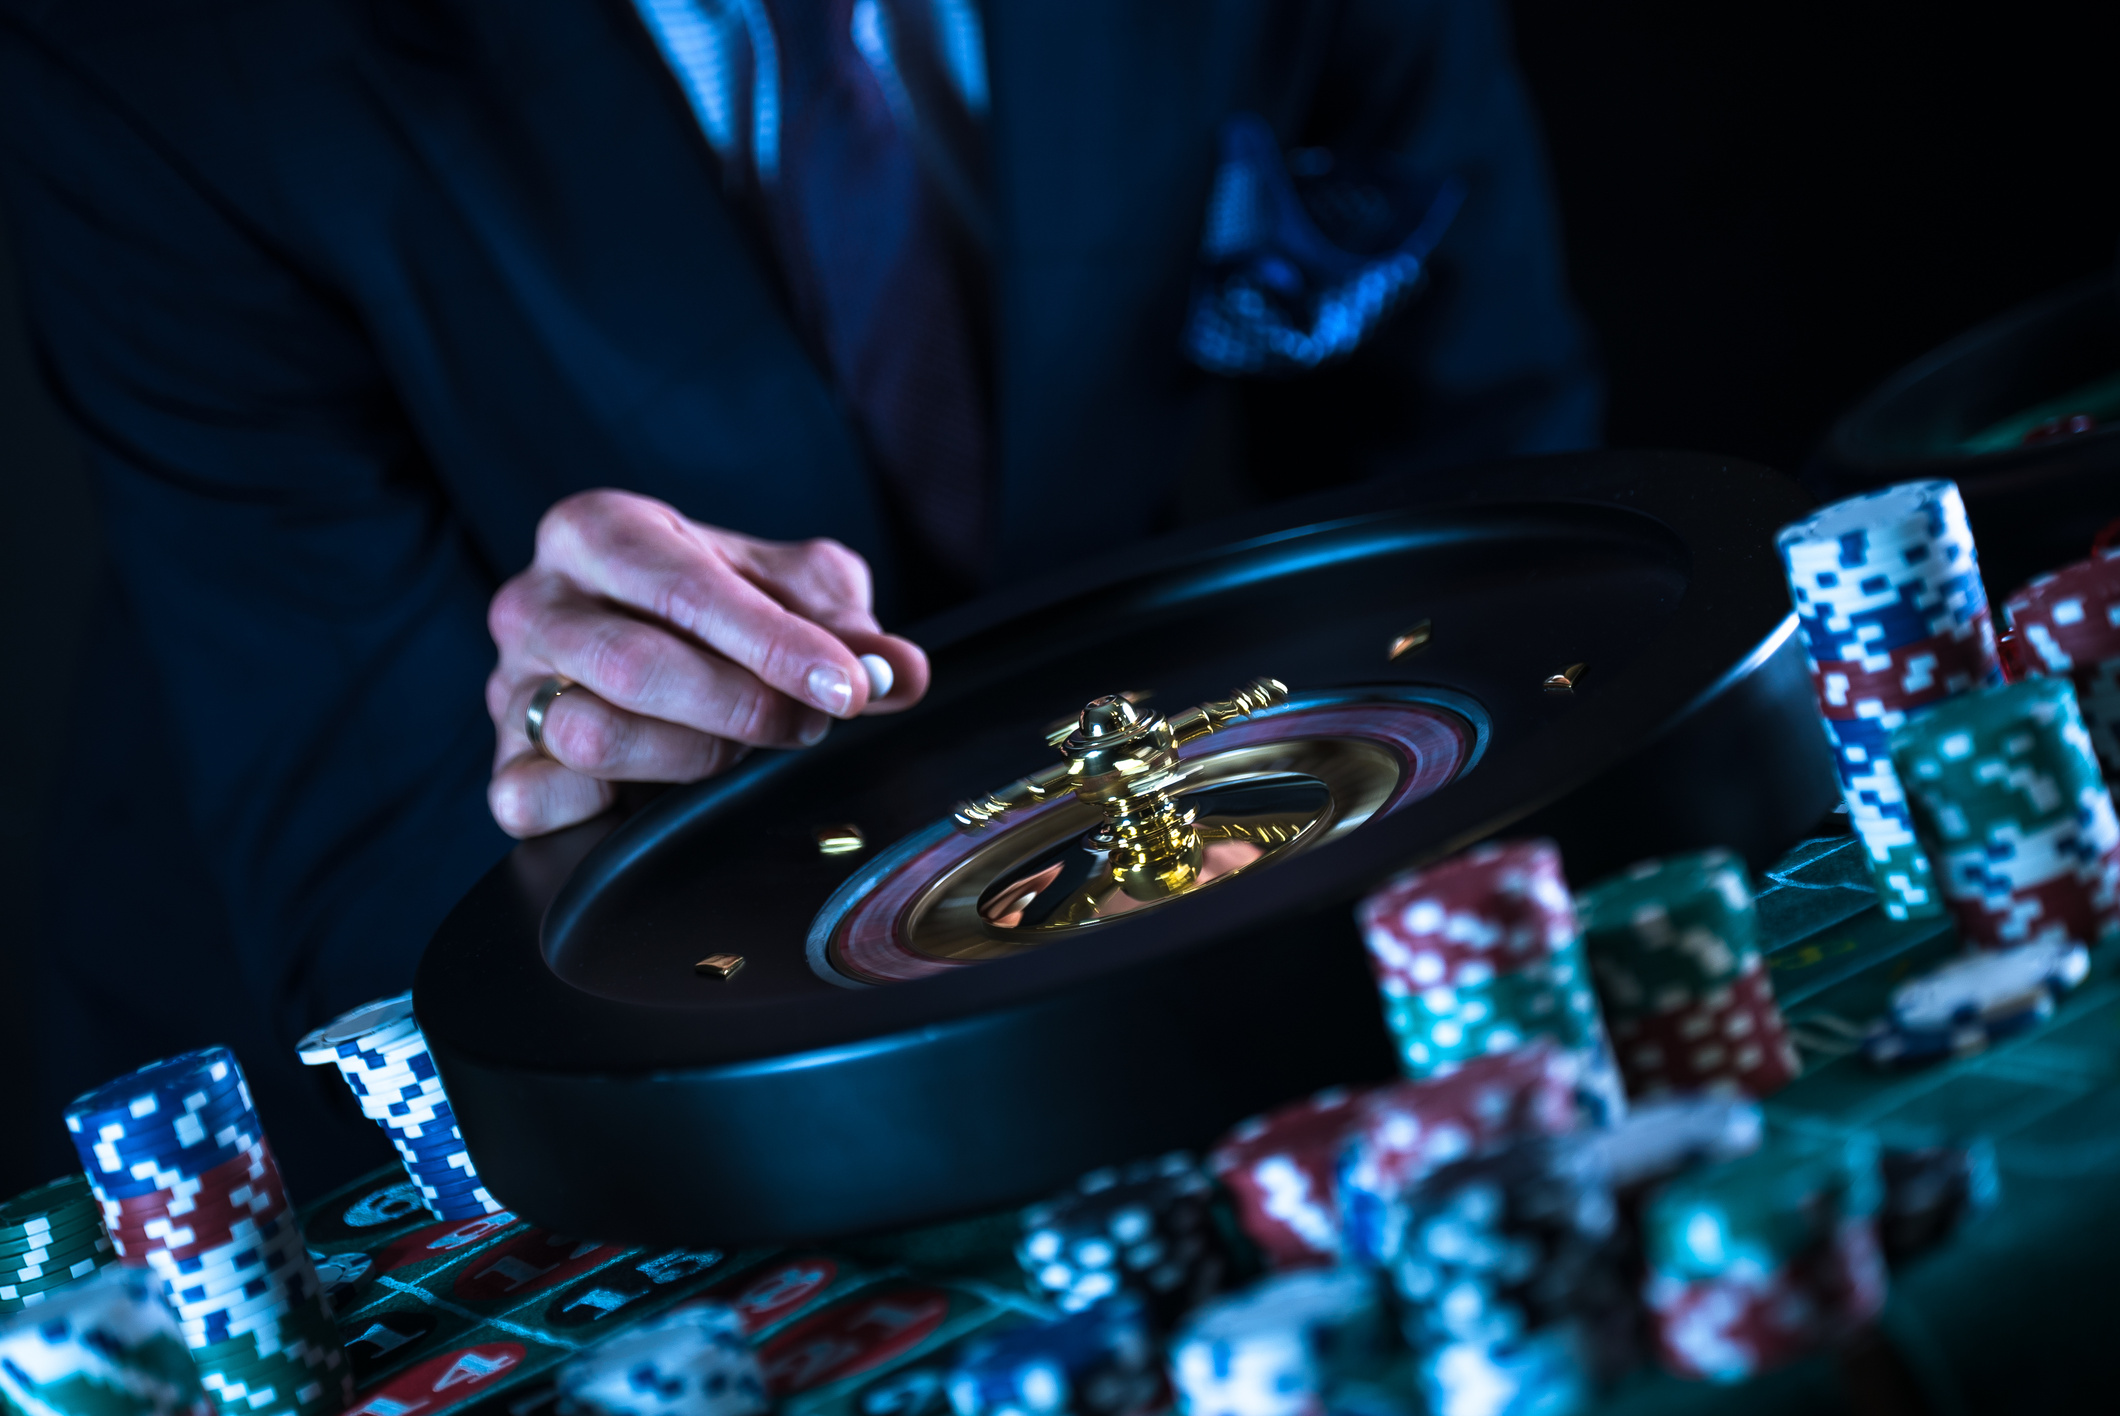 Casino Money Games Bet Concept Photo. Conceptual Casino Background with Roulette Wheel,